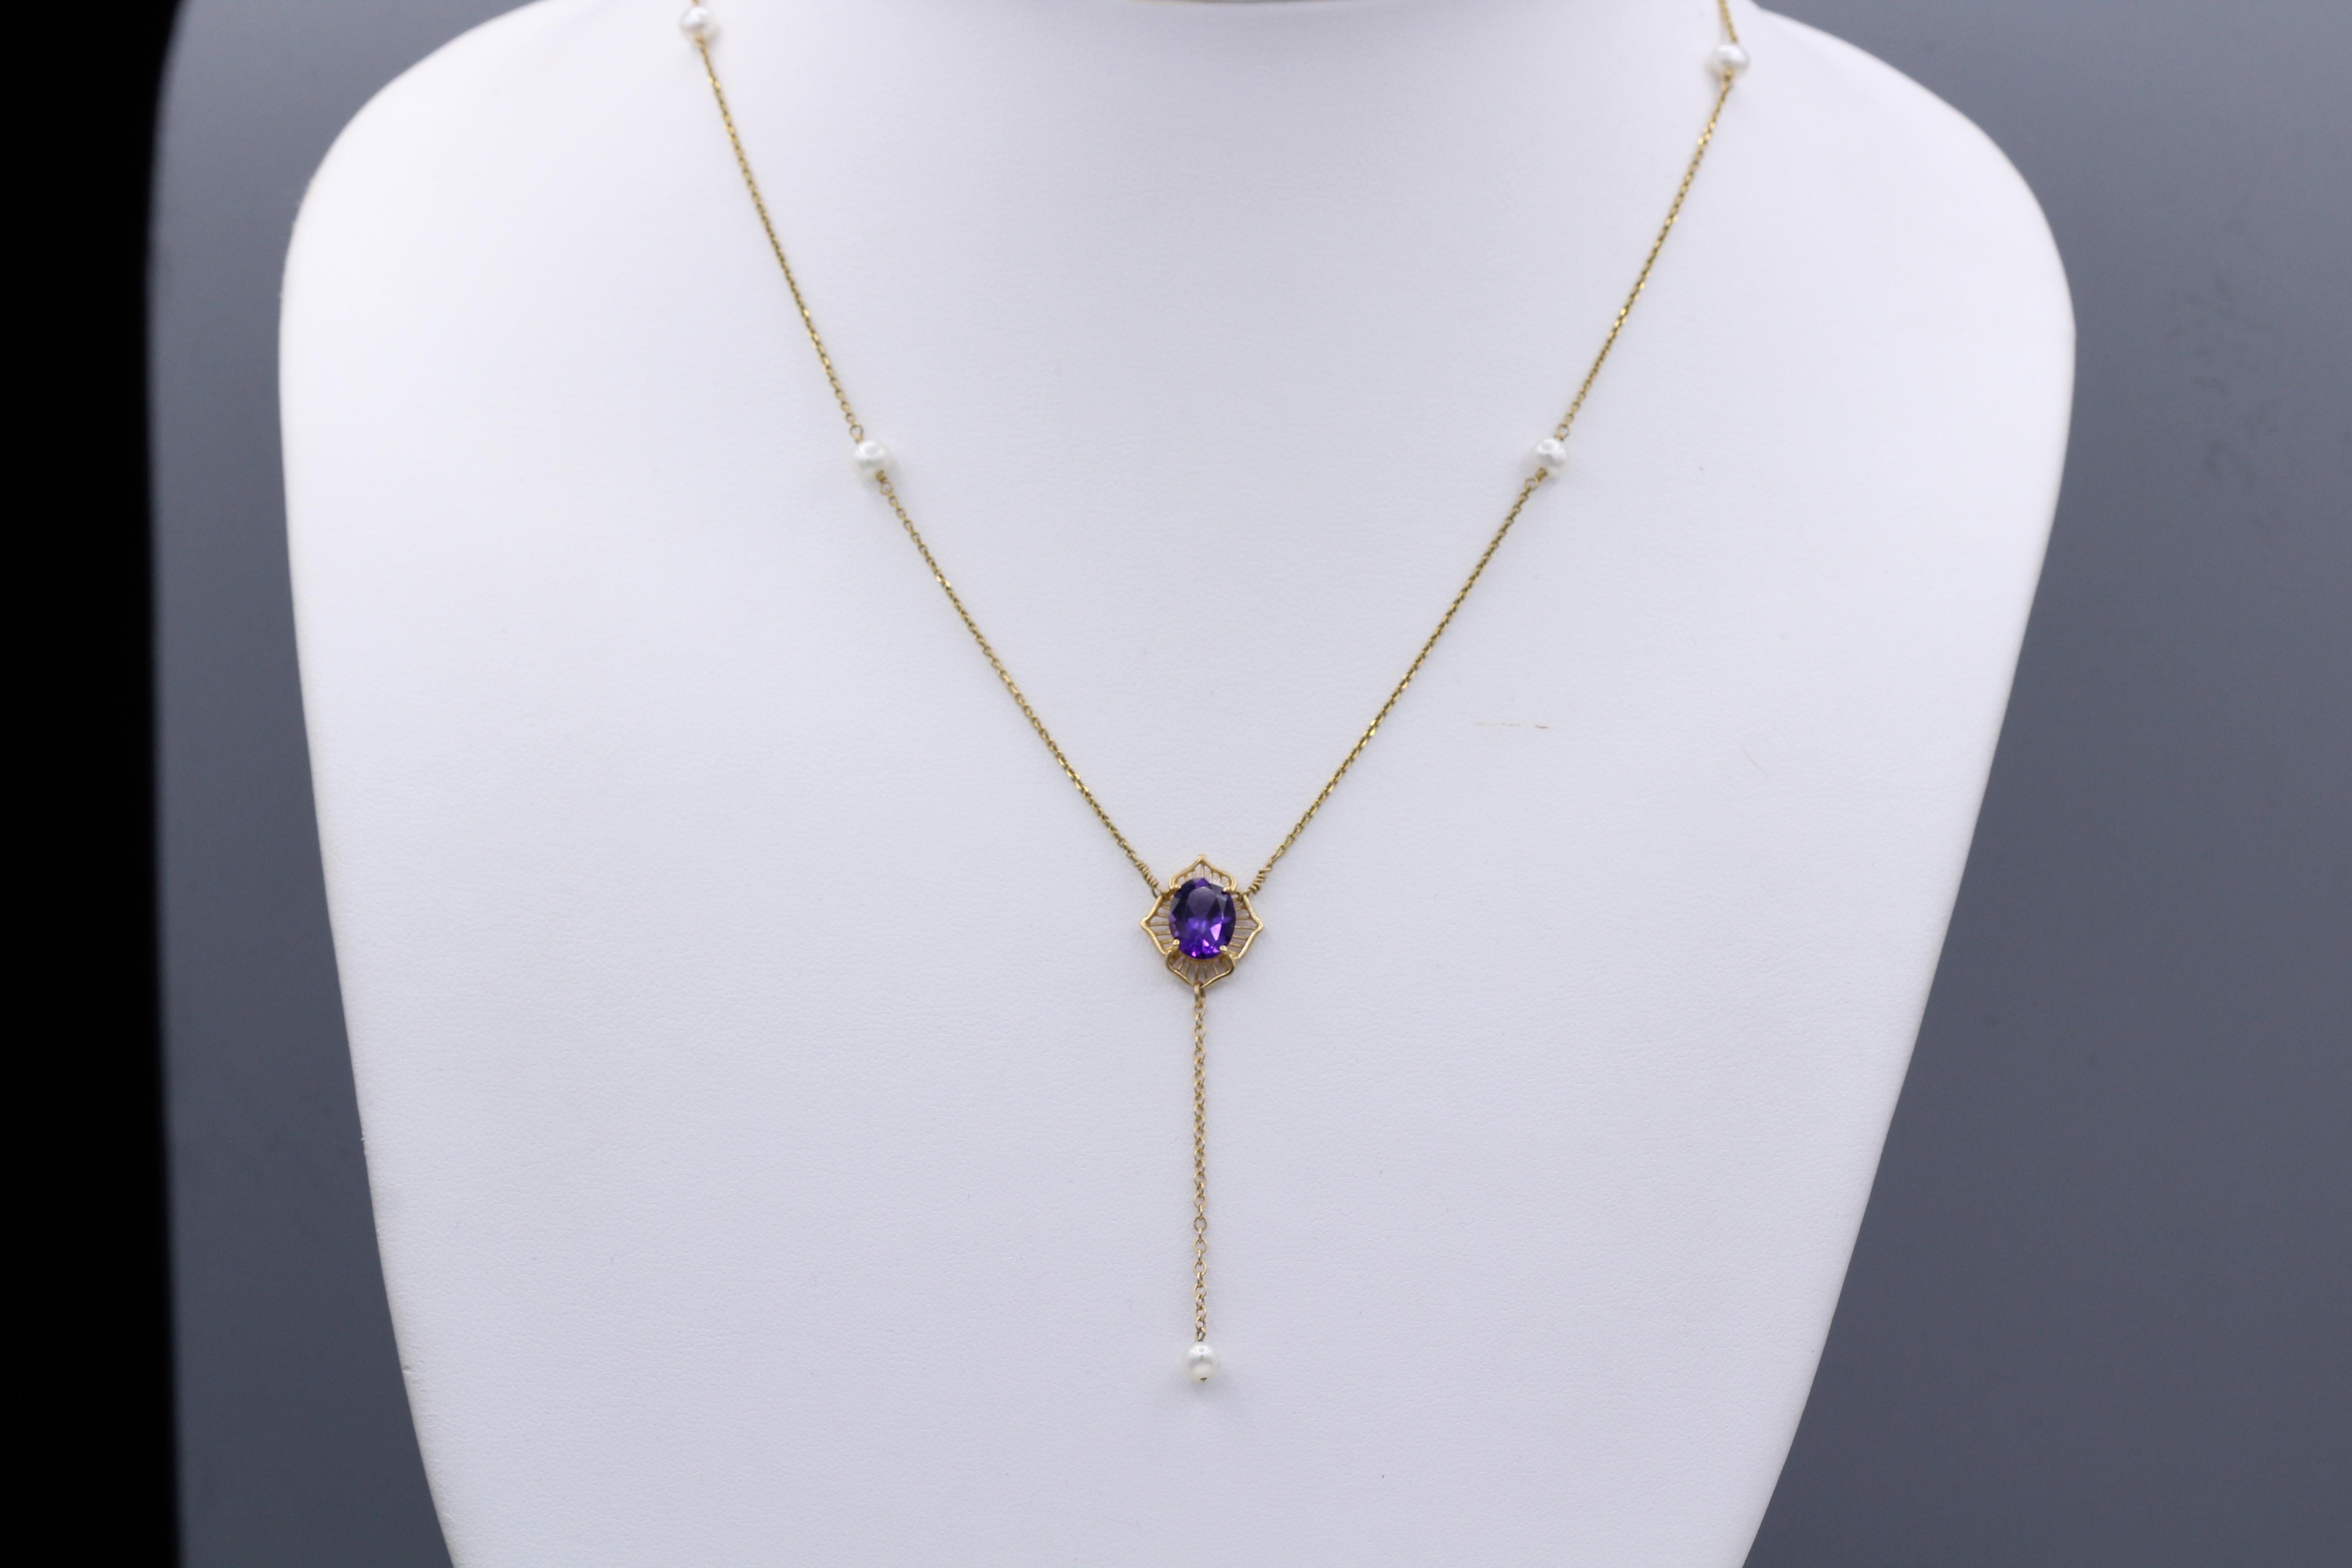 Elegant Drop Amethyst Necklace 
Dangling Style & Beaded Pearls 
14k Yellow Gold
Length 17’ Inch
Dangle Length approx. 2’ Inch
Natural Amethyst oval Shape  9 x 7 mm
Fresh water Pearls approx. 3.0 mm
Spring Ring Lock
Total weight 3.3 Grams
